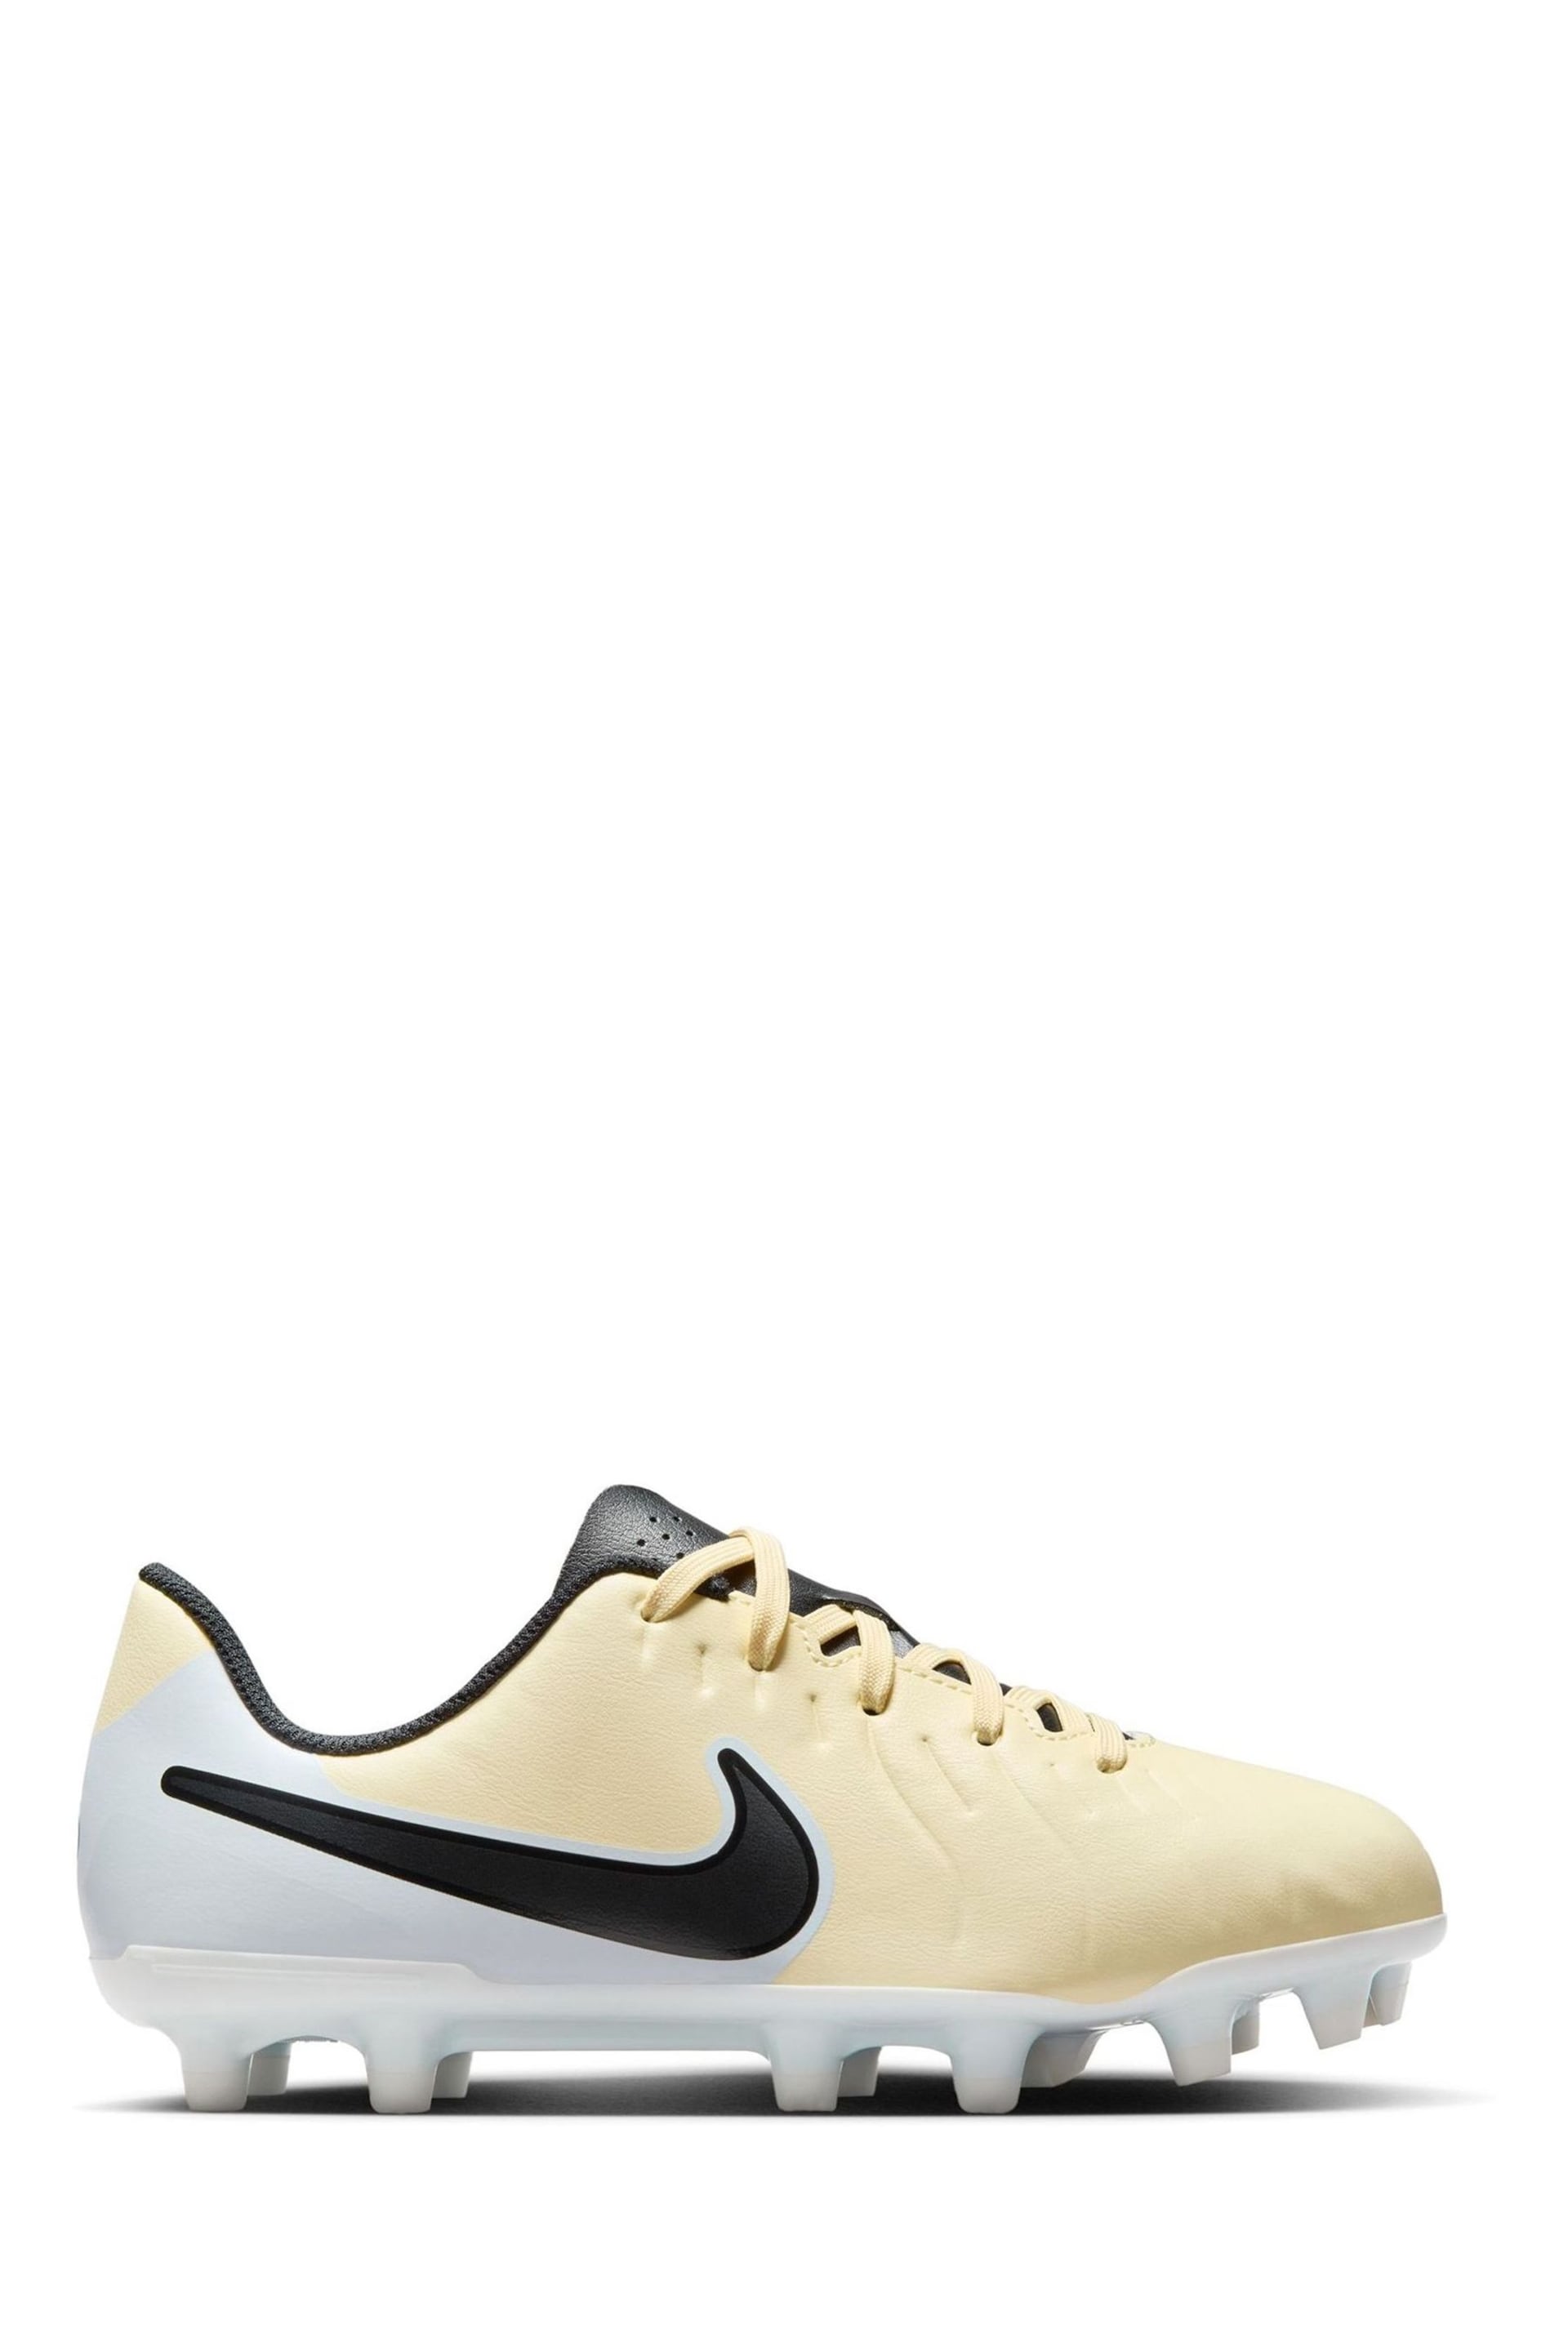 Nike Yellow Jr Tiempo Legend 10 Club Multi Ground Football Boots - Image 3 of 11